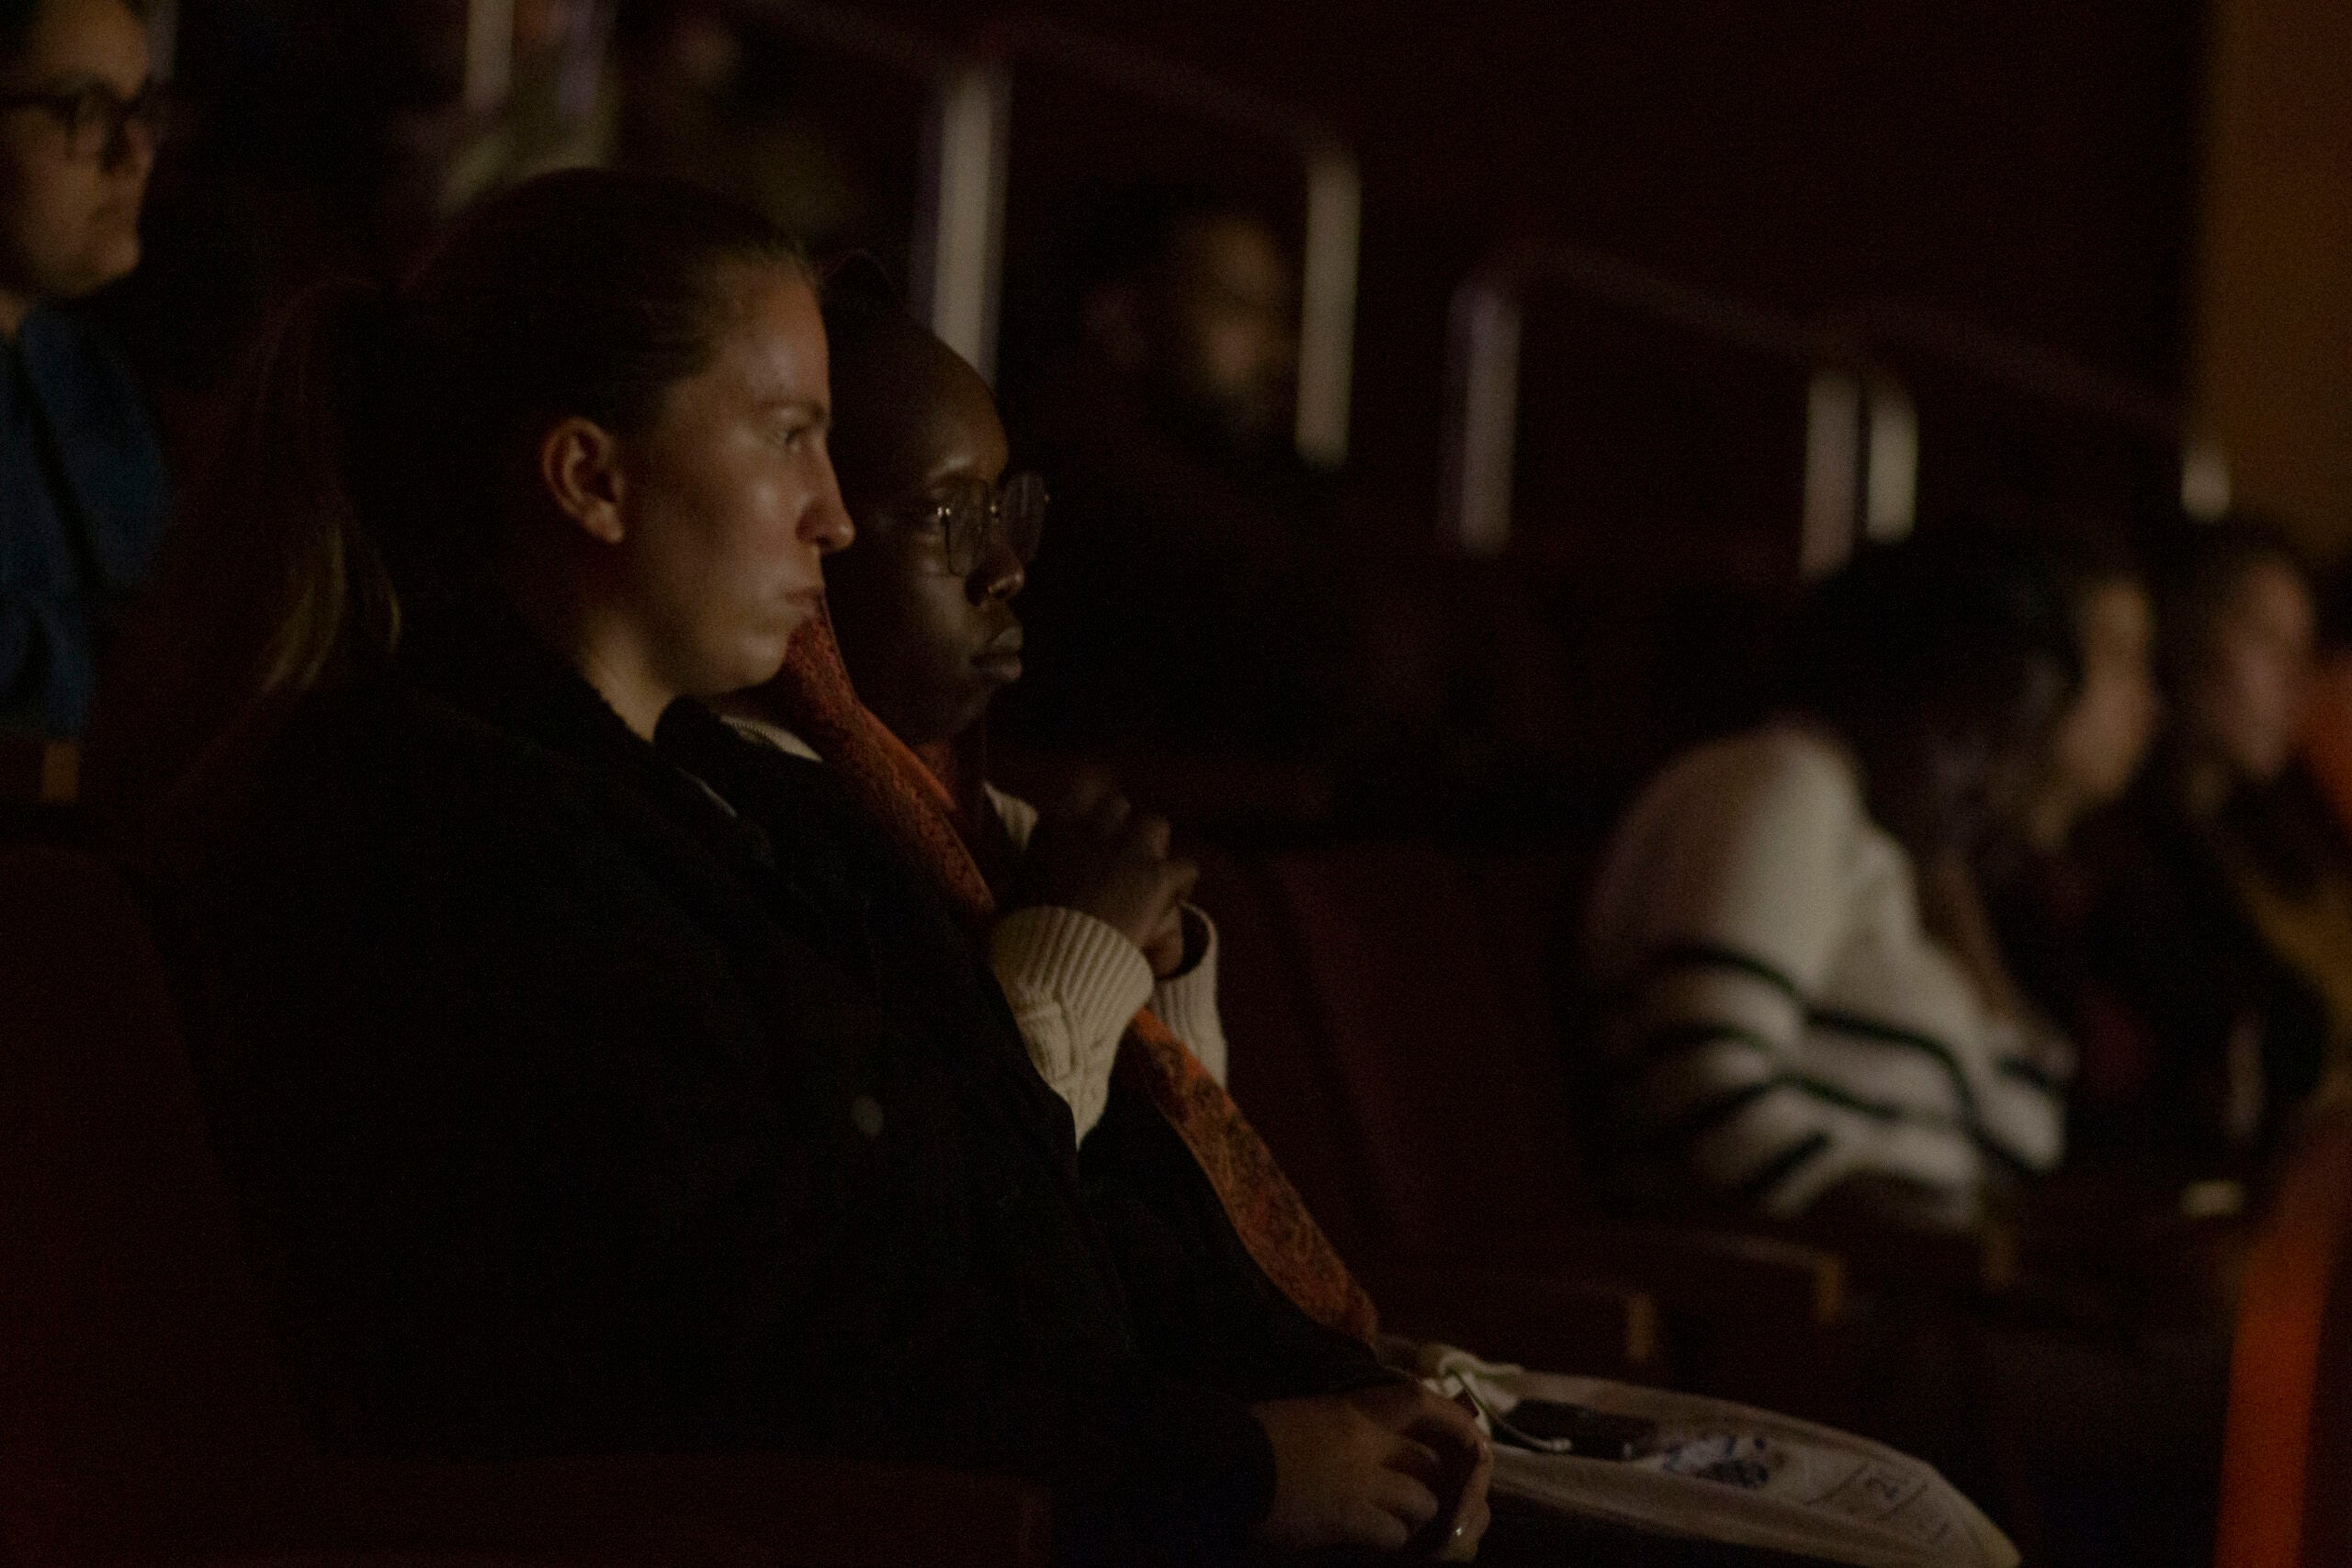 Two women are seated together in a dark auditorium. They are watching the film.